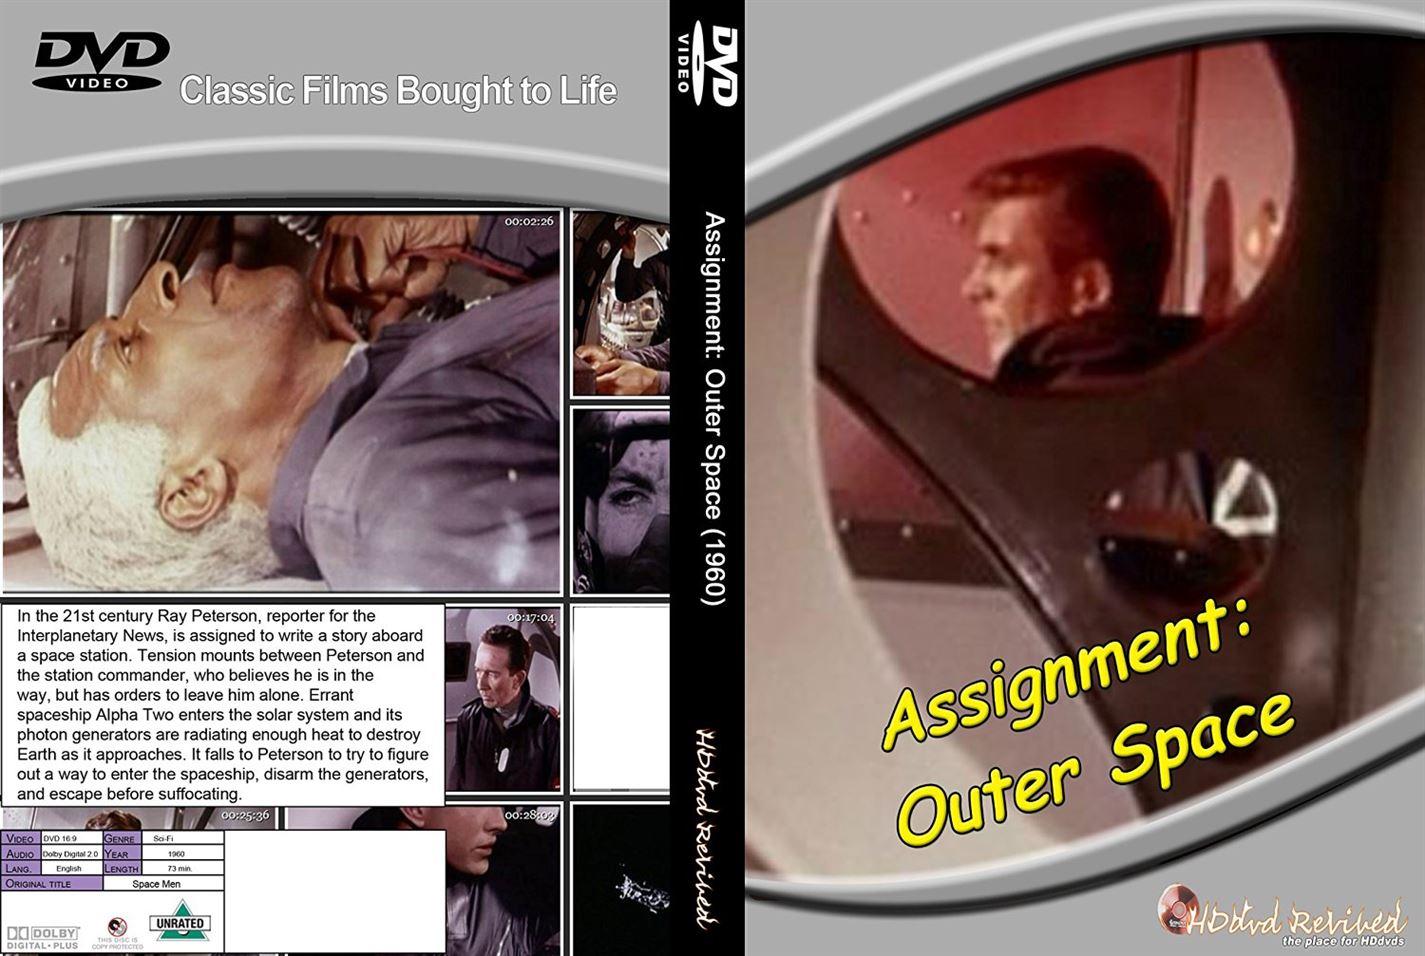 Assignment Outer Space - Standard DVD - HDDVD-REVIVED - NEW- UK SELLER